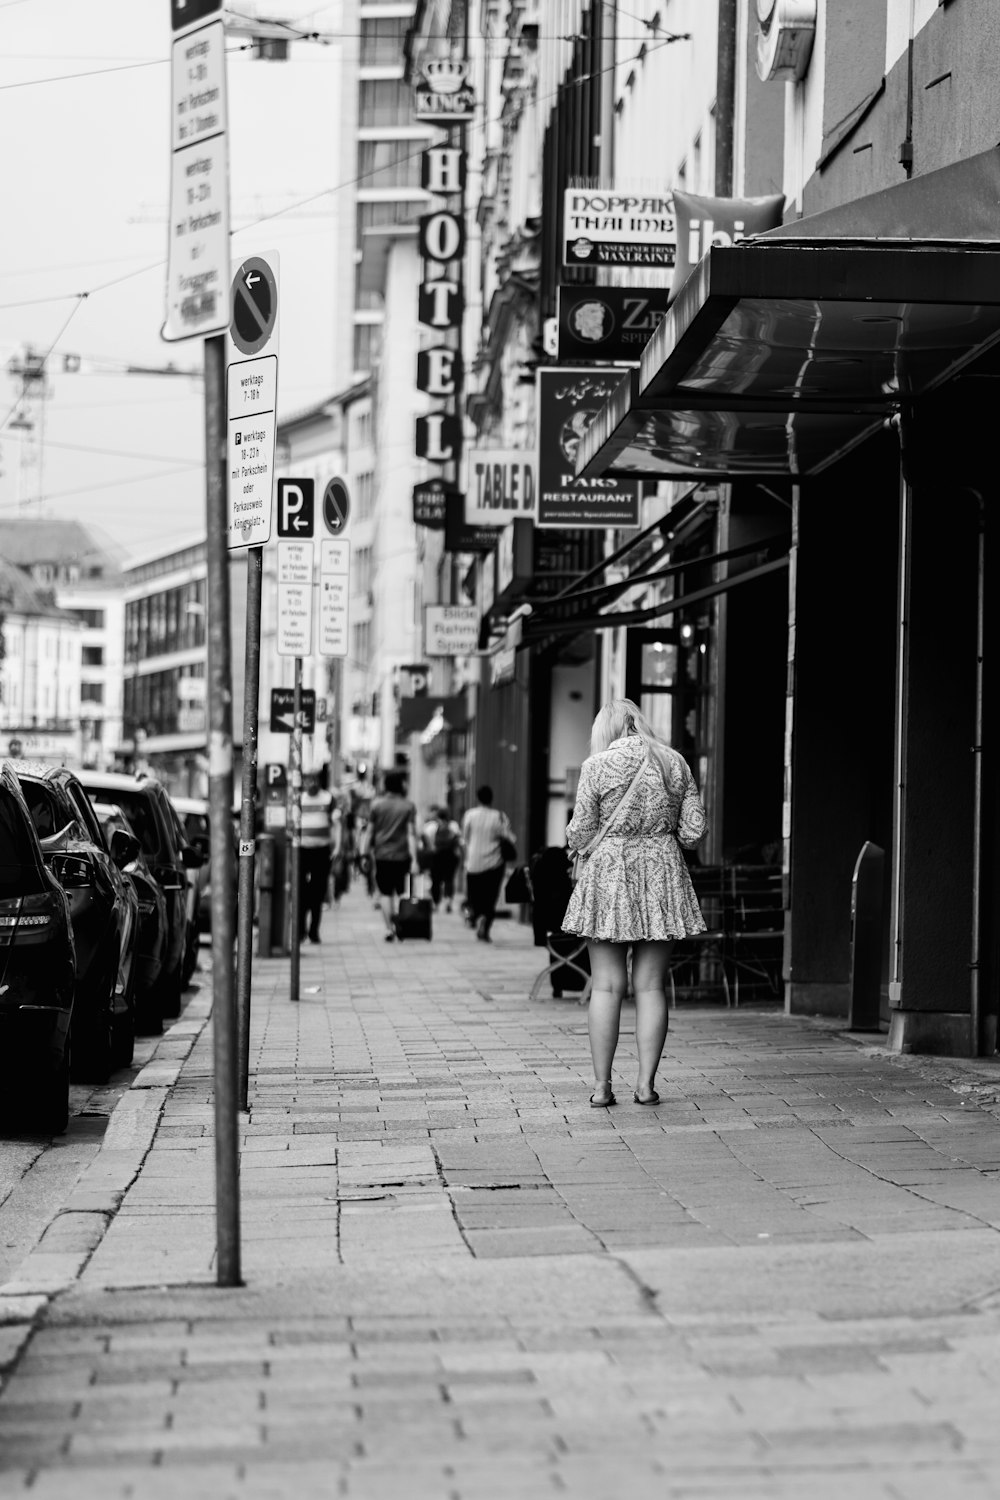 a woman walking down a street next to parked cars